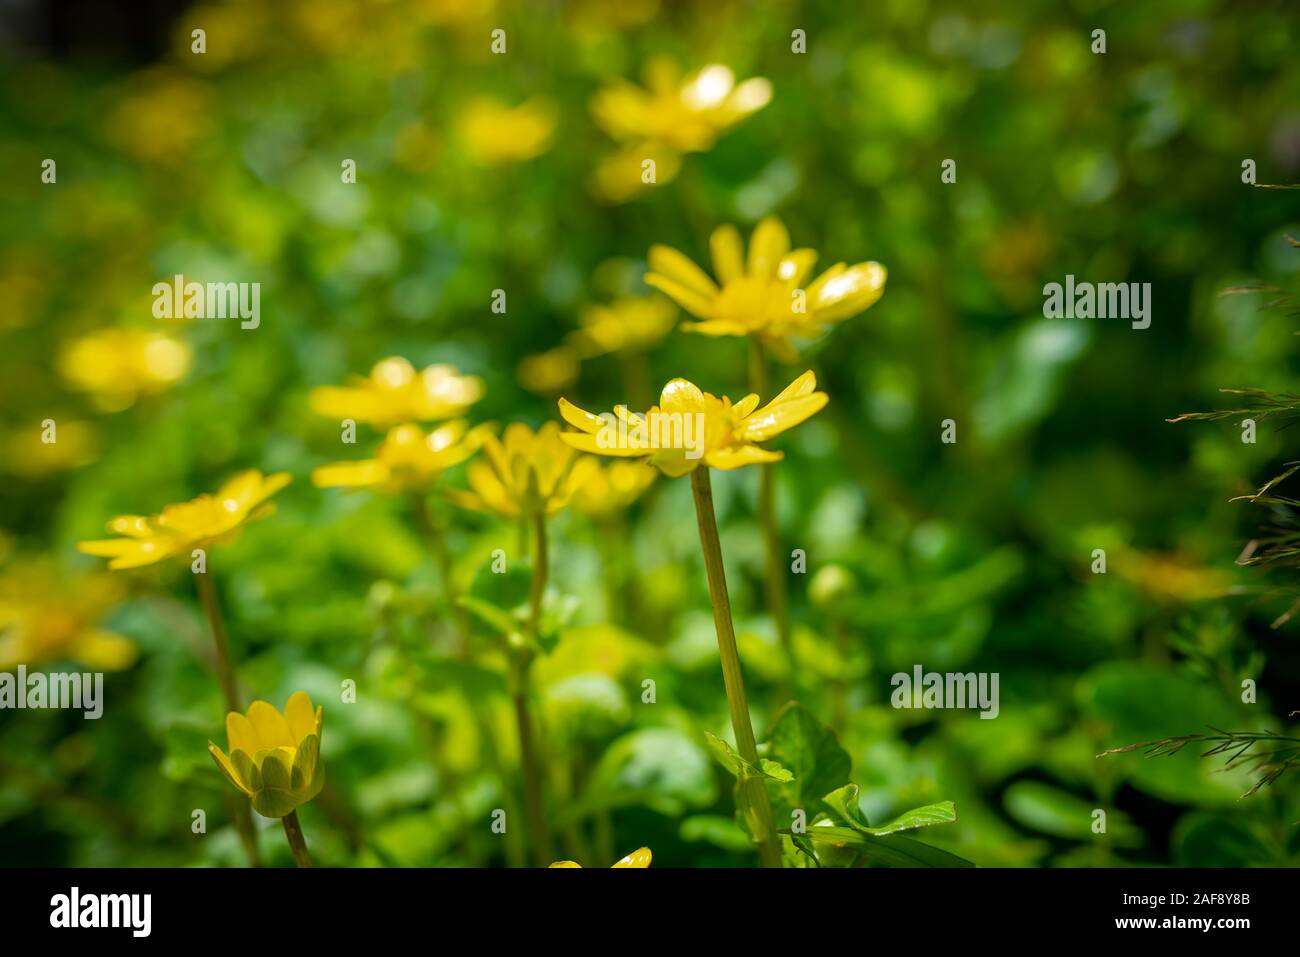 Yellow anemone flowers on a blurred background, taken during a sunny spring morning in Kyoto, Japan Stock Photo